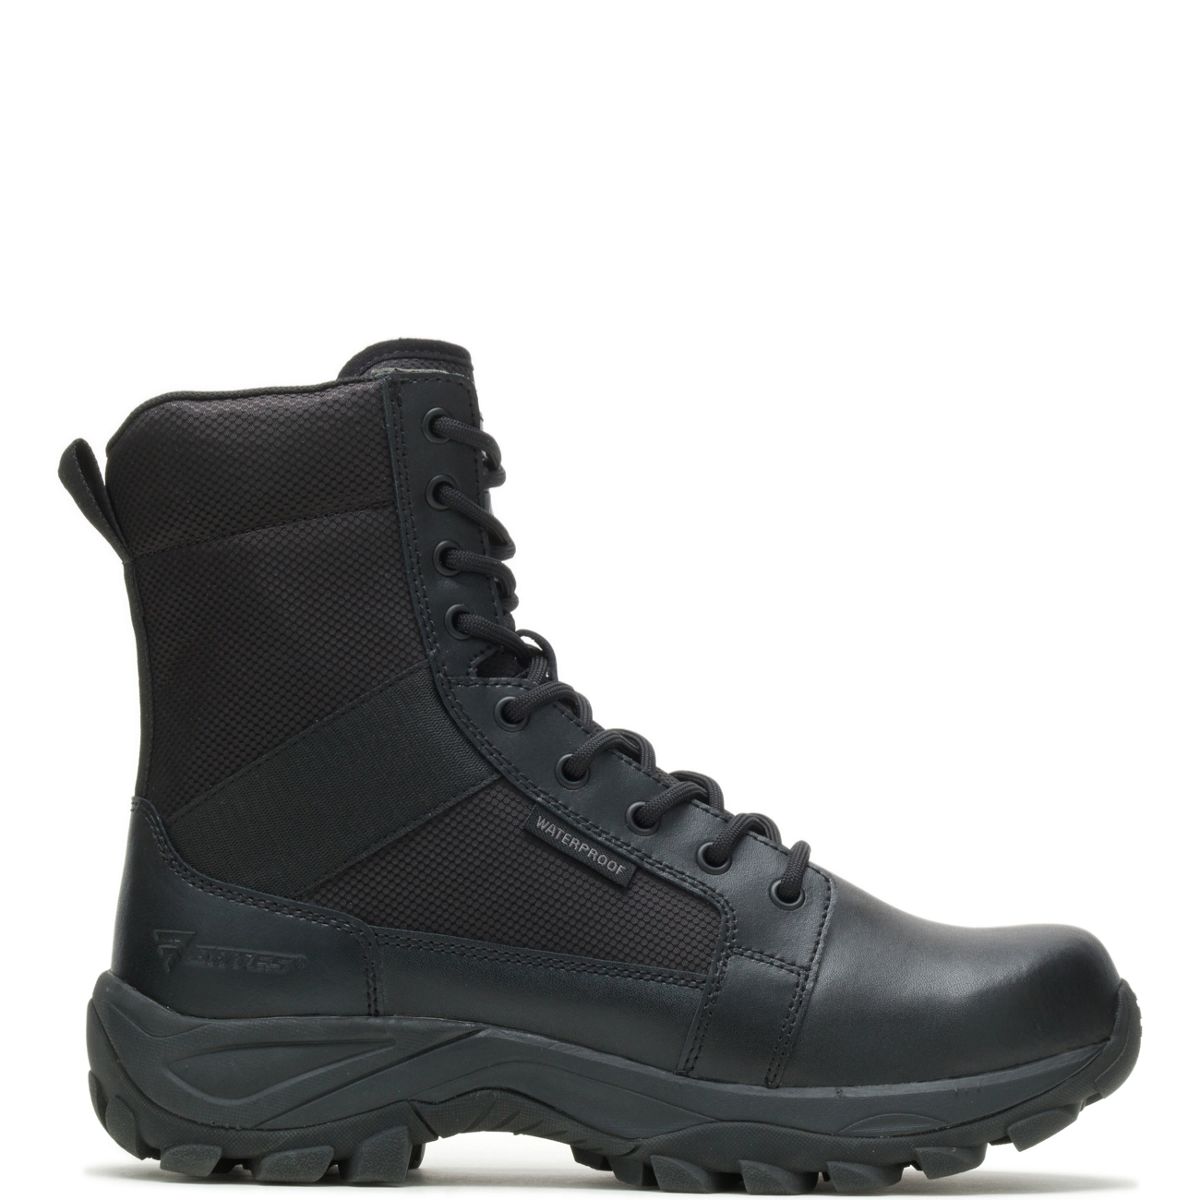 Under Armour Men's Tactical Boots as low as $54 shipped!